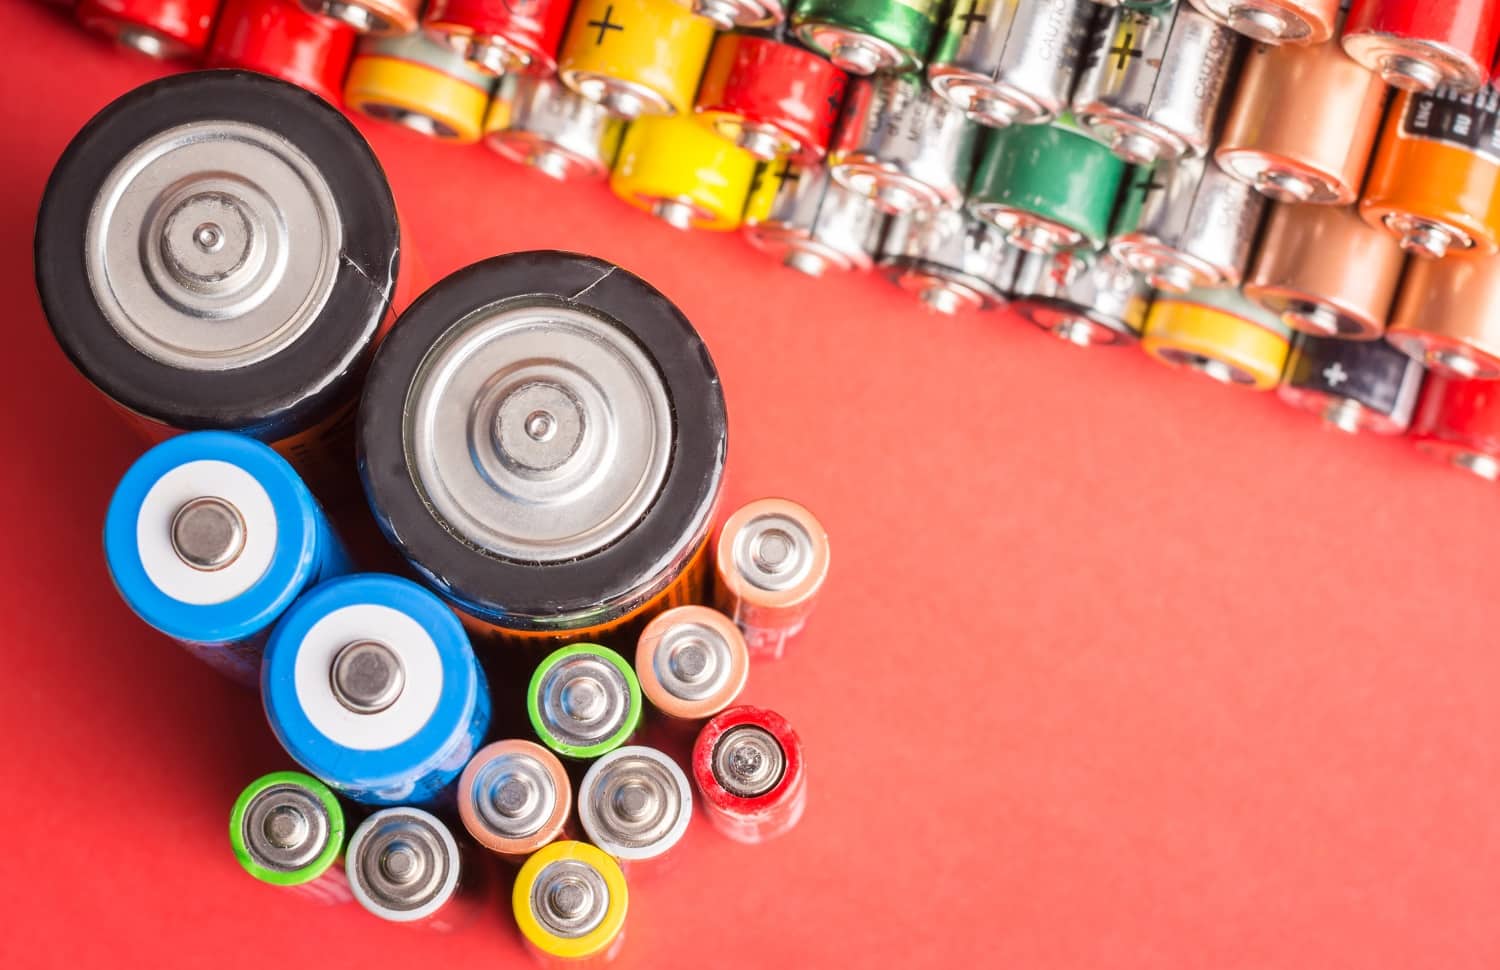 Batteries of different types and sizes on red background